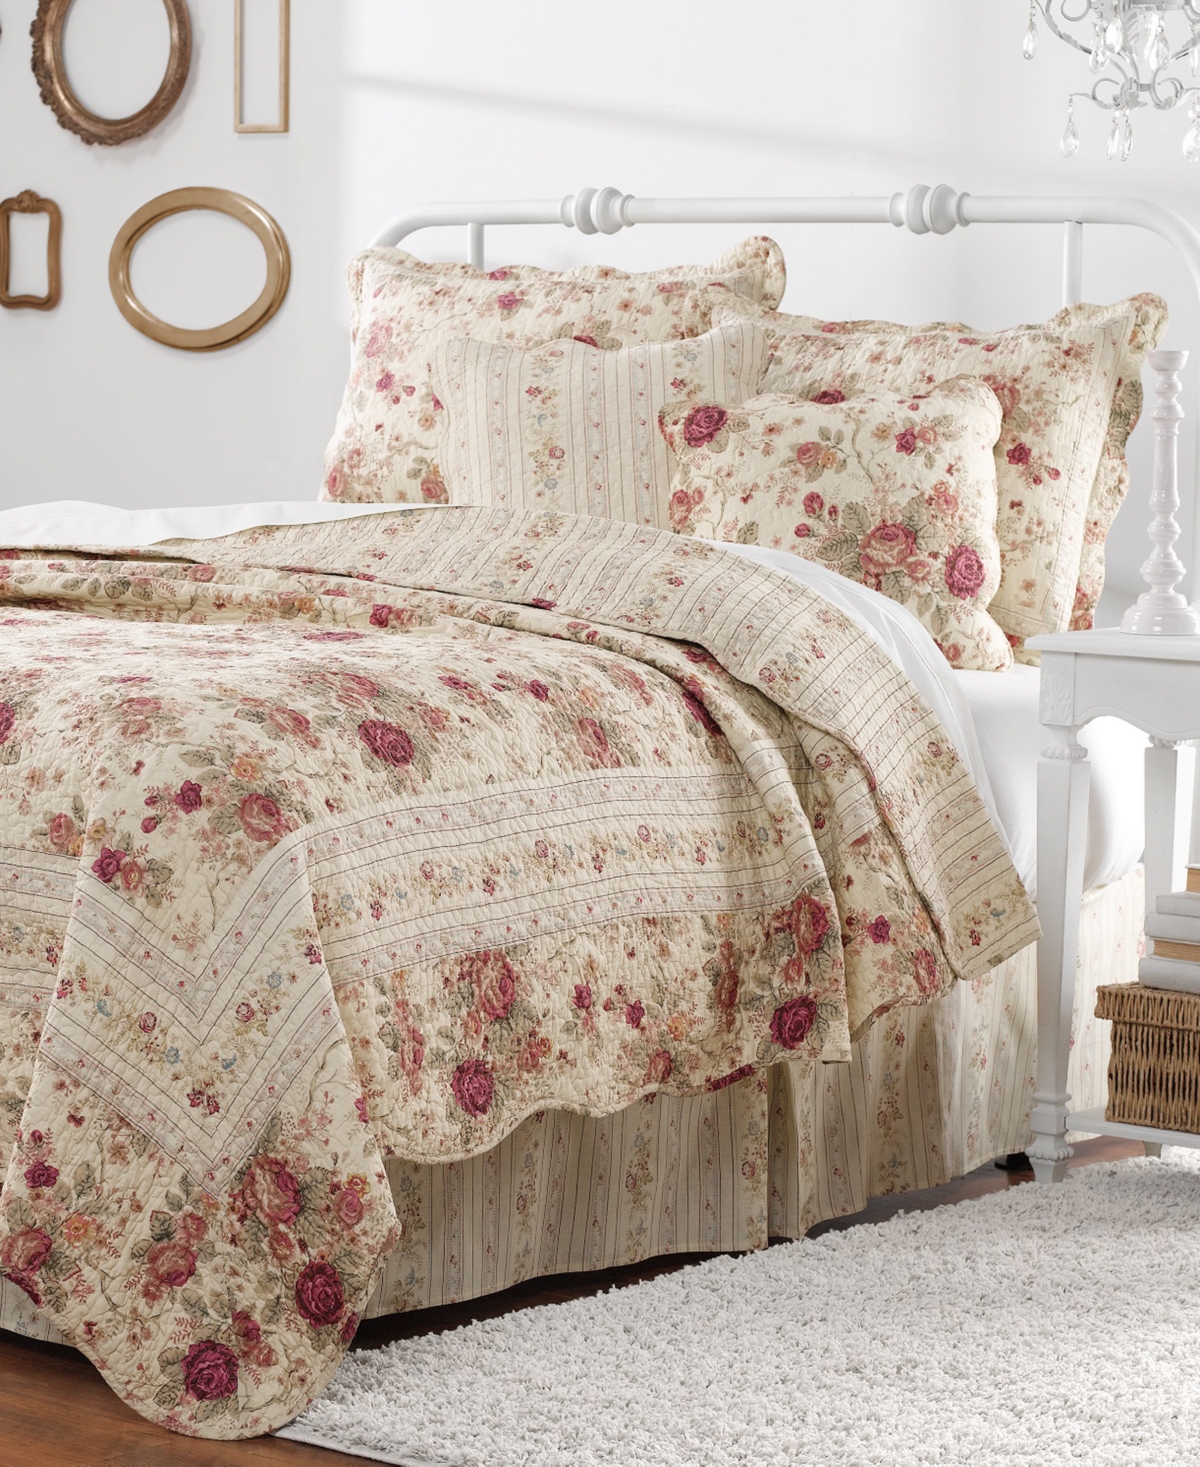 Greenland Home Fashions Antique-like Rose 100% Cotton Reversible 4 Piece Quilt Set, Twin/xl In Ecru